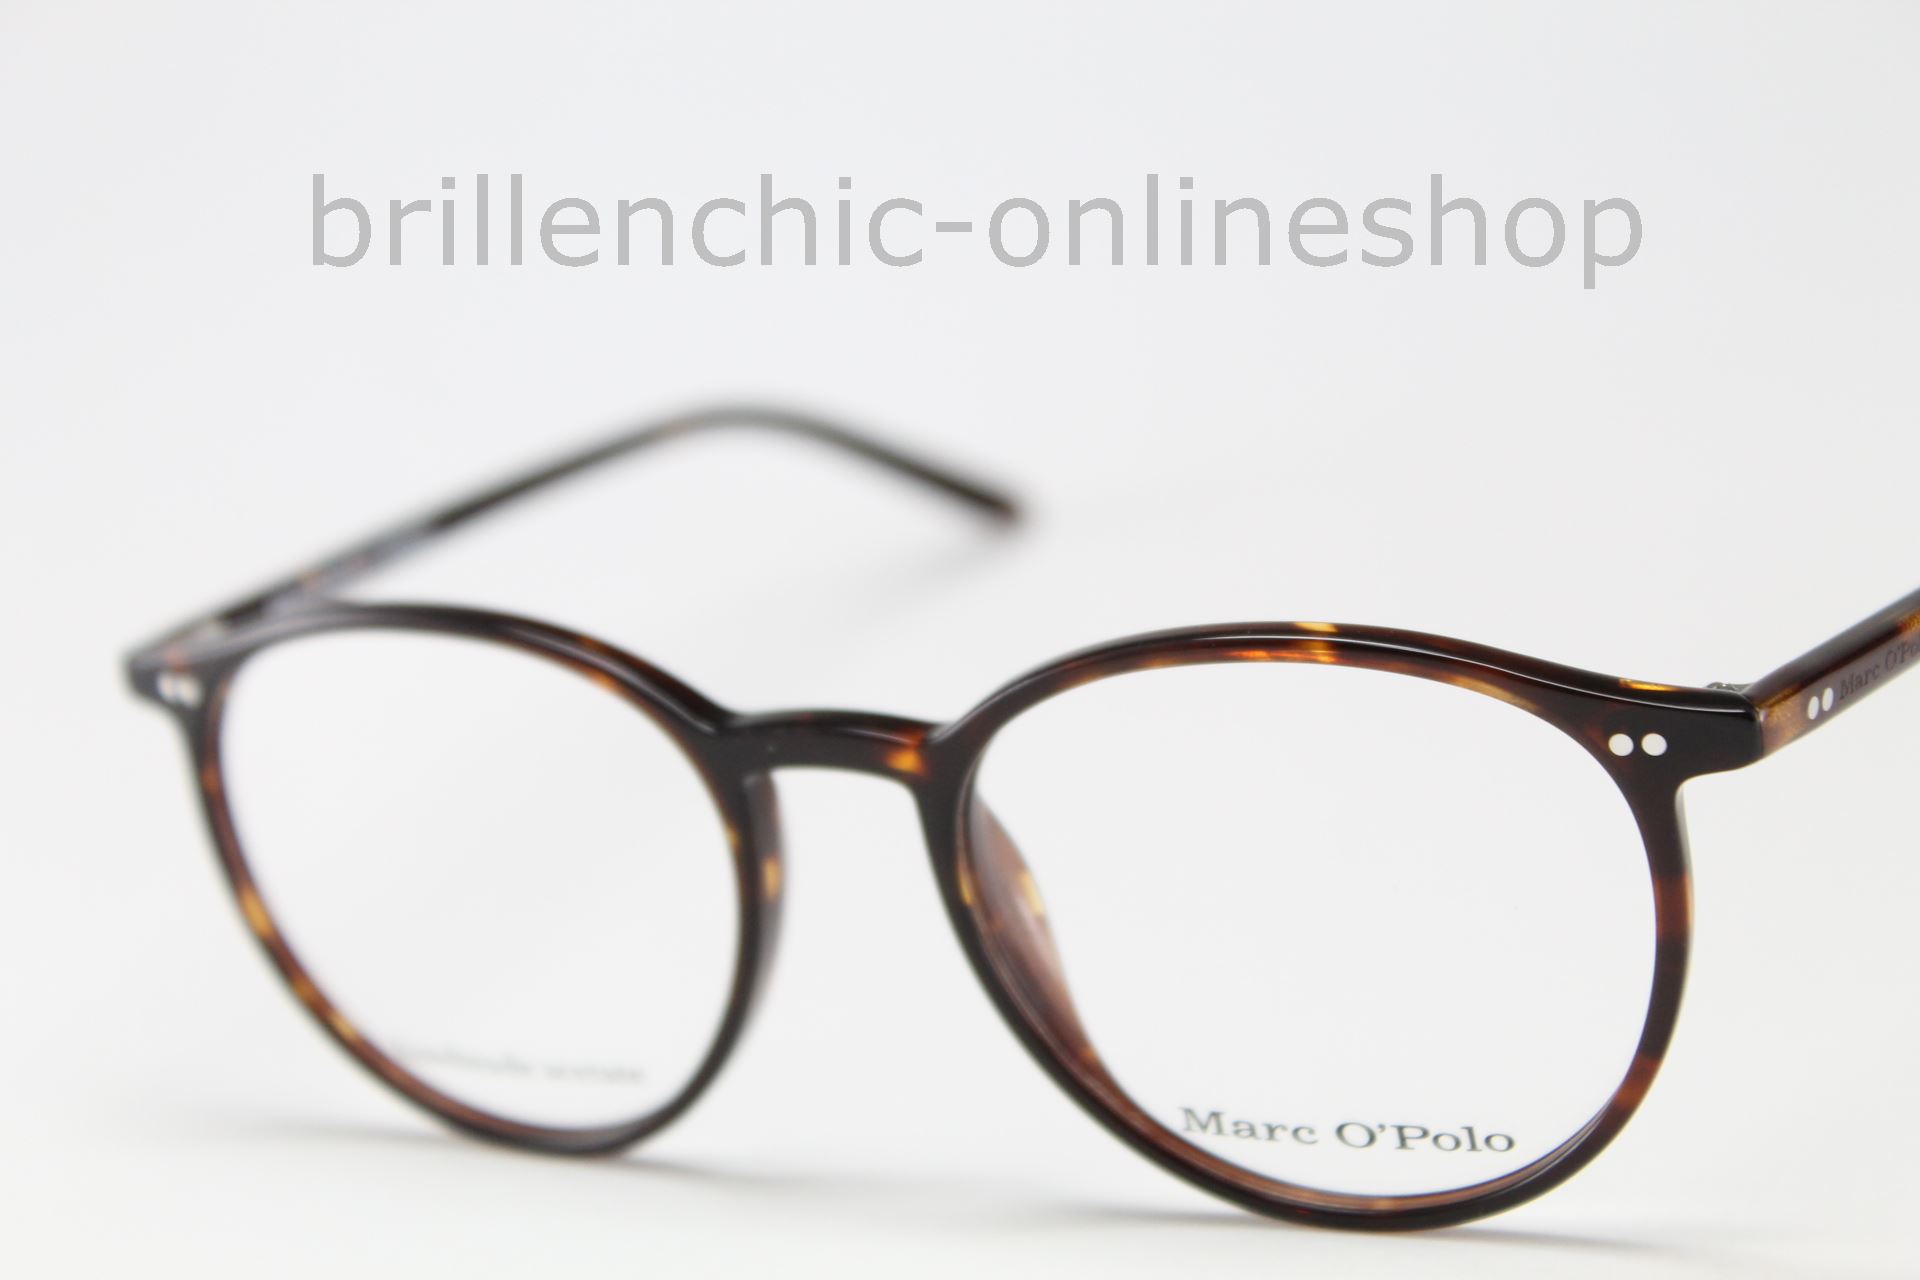 House grocery store Encyclopedia Brillenchic-onlineshop in Berlin - MARC O'POLO 503084 61 "NEW"